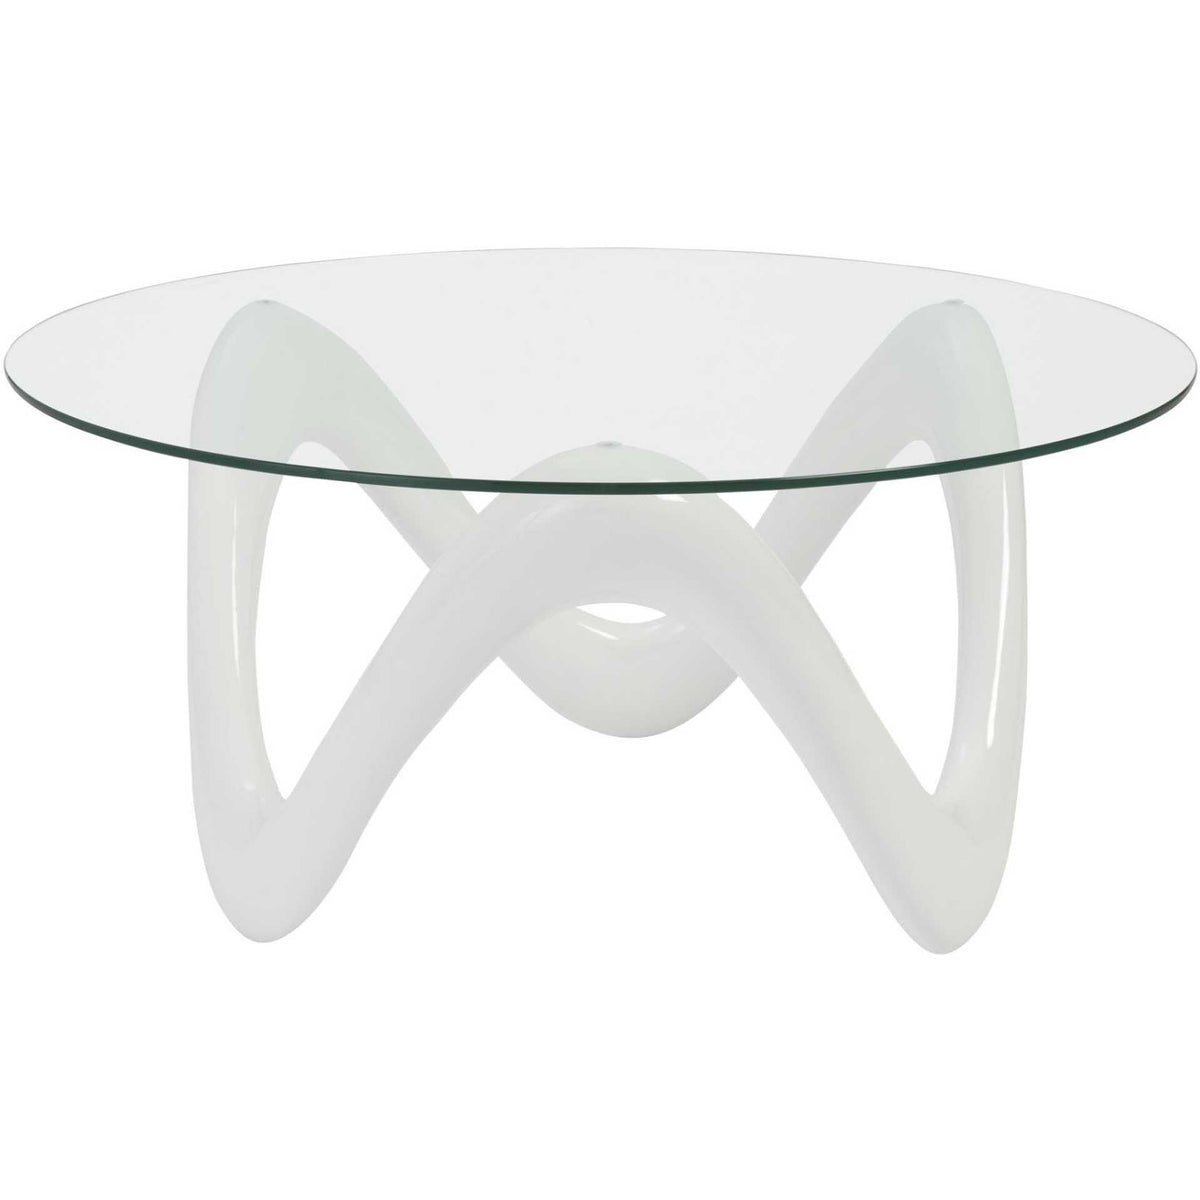 Coral Coffee Table High Gloss White/Clear